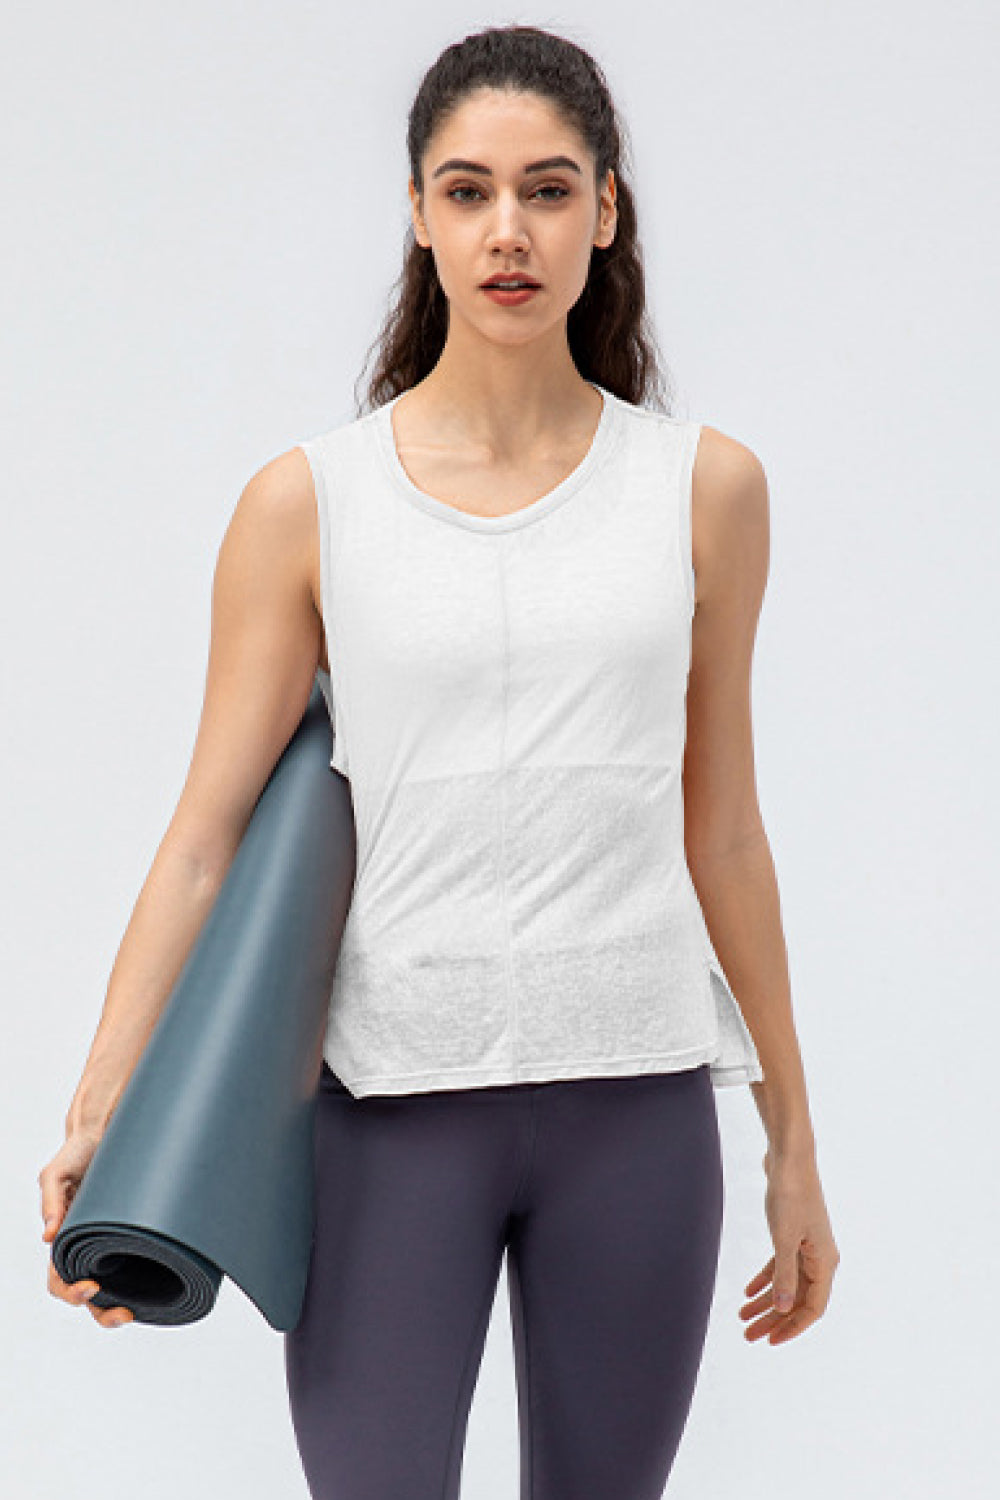 Side Slit High-Low Sleeveless Athletic Top - Classy Fashion Chic